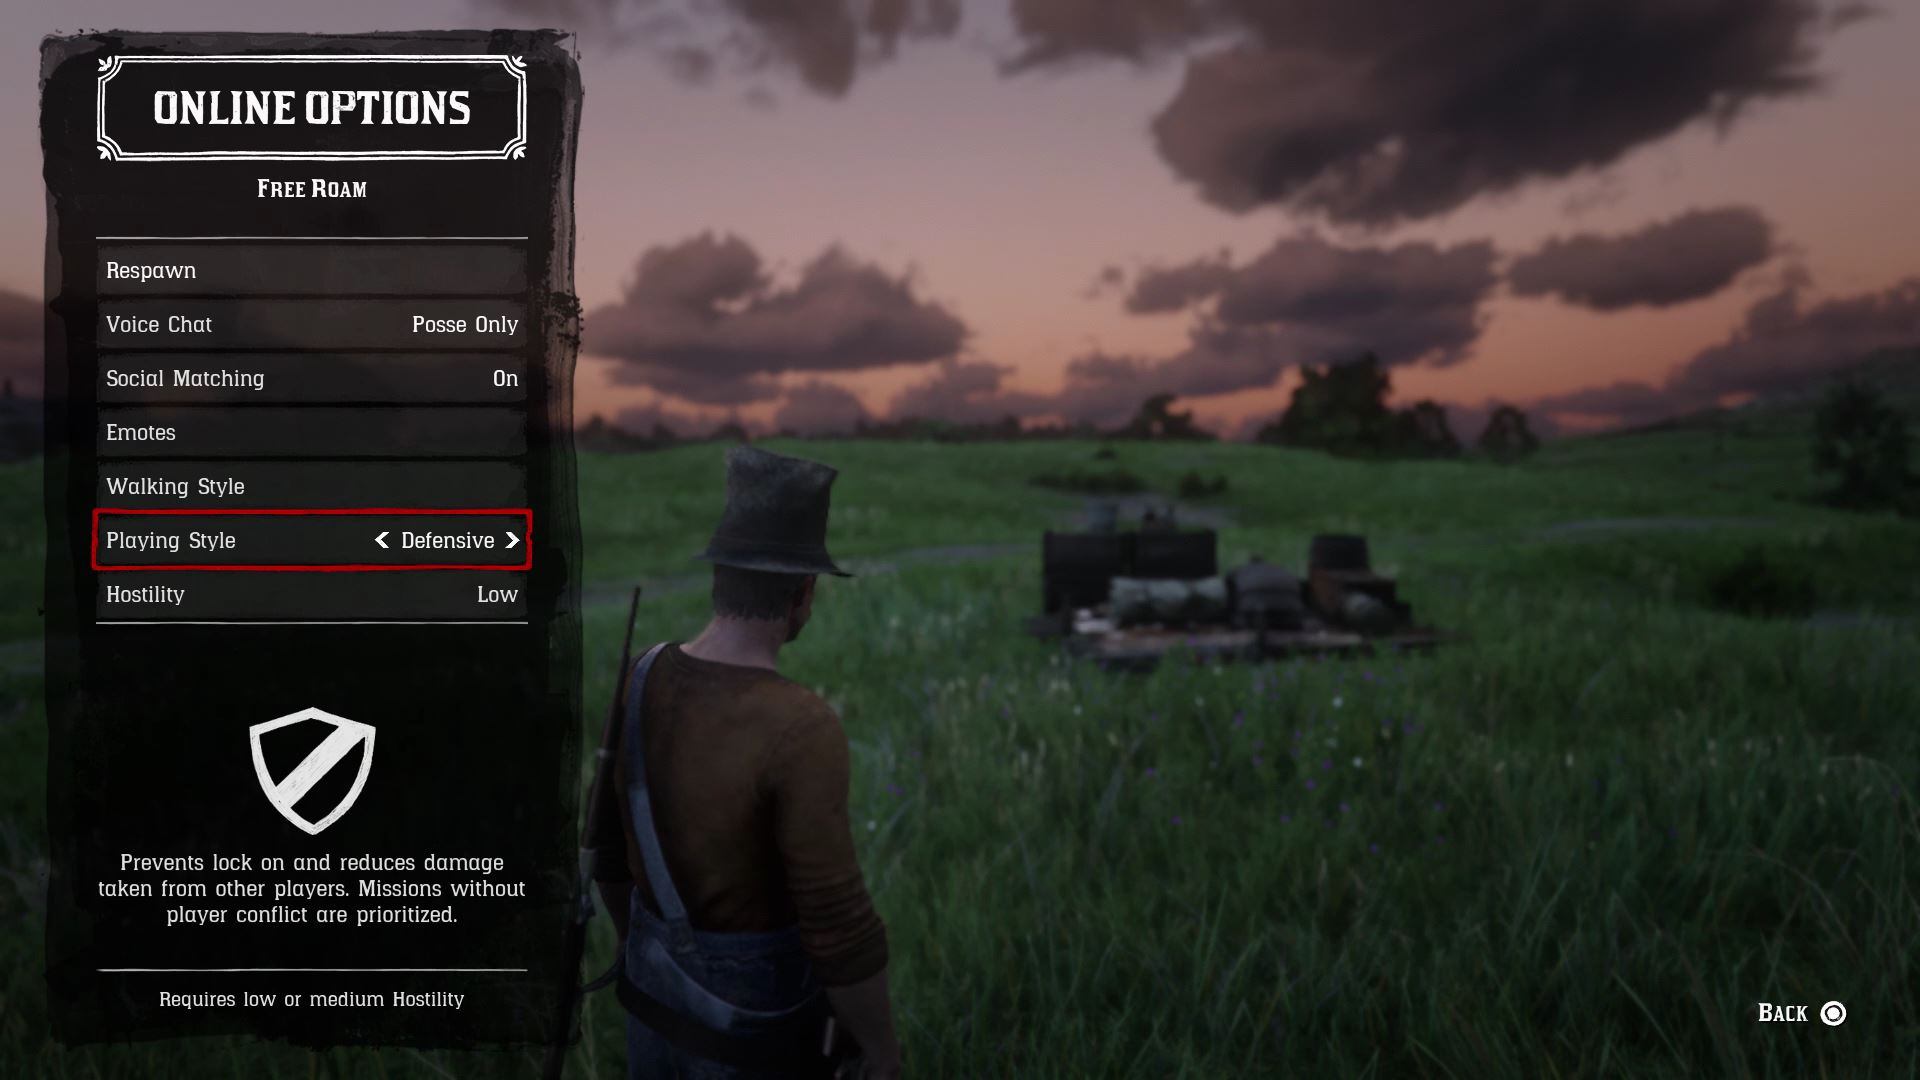 Red Dead Online Posses explained - how to make a Posse and join